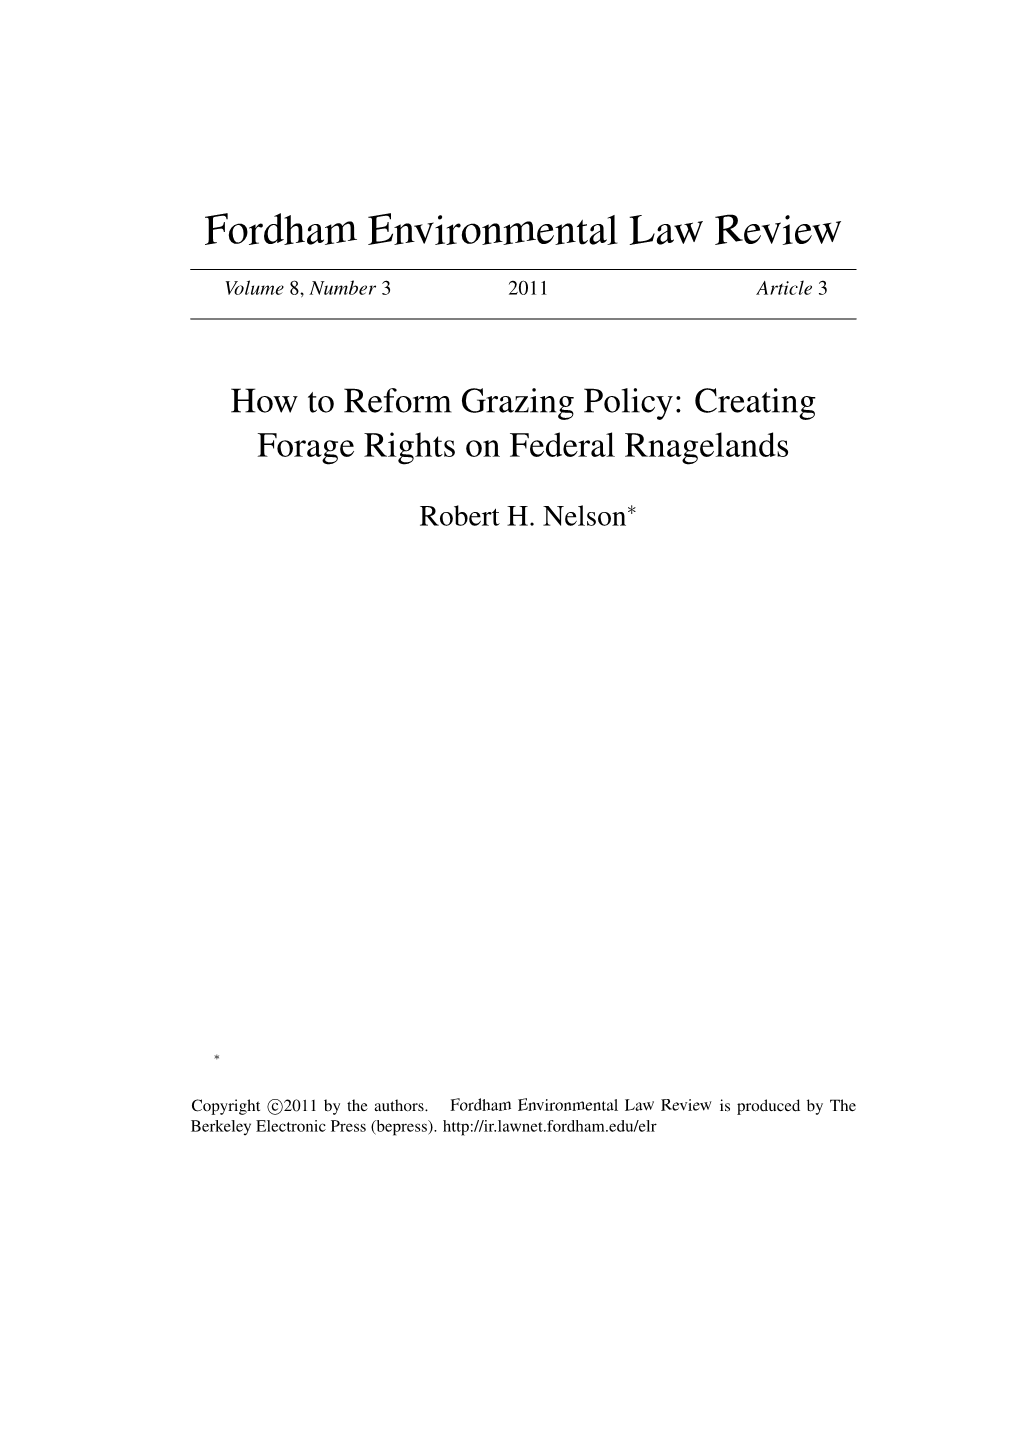 How to Reform Grazing Policy: Creating Forage Rights on Federal Rnagelands